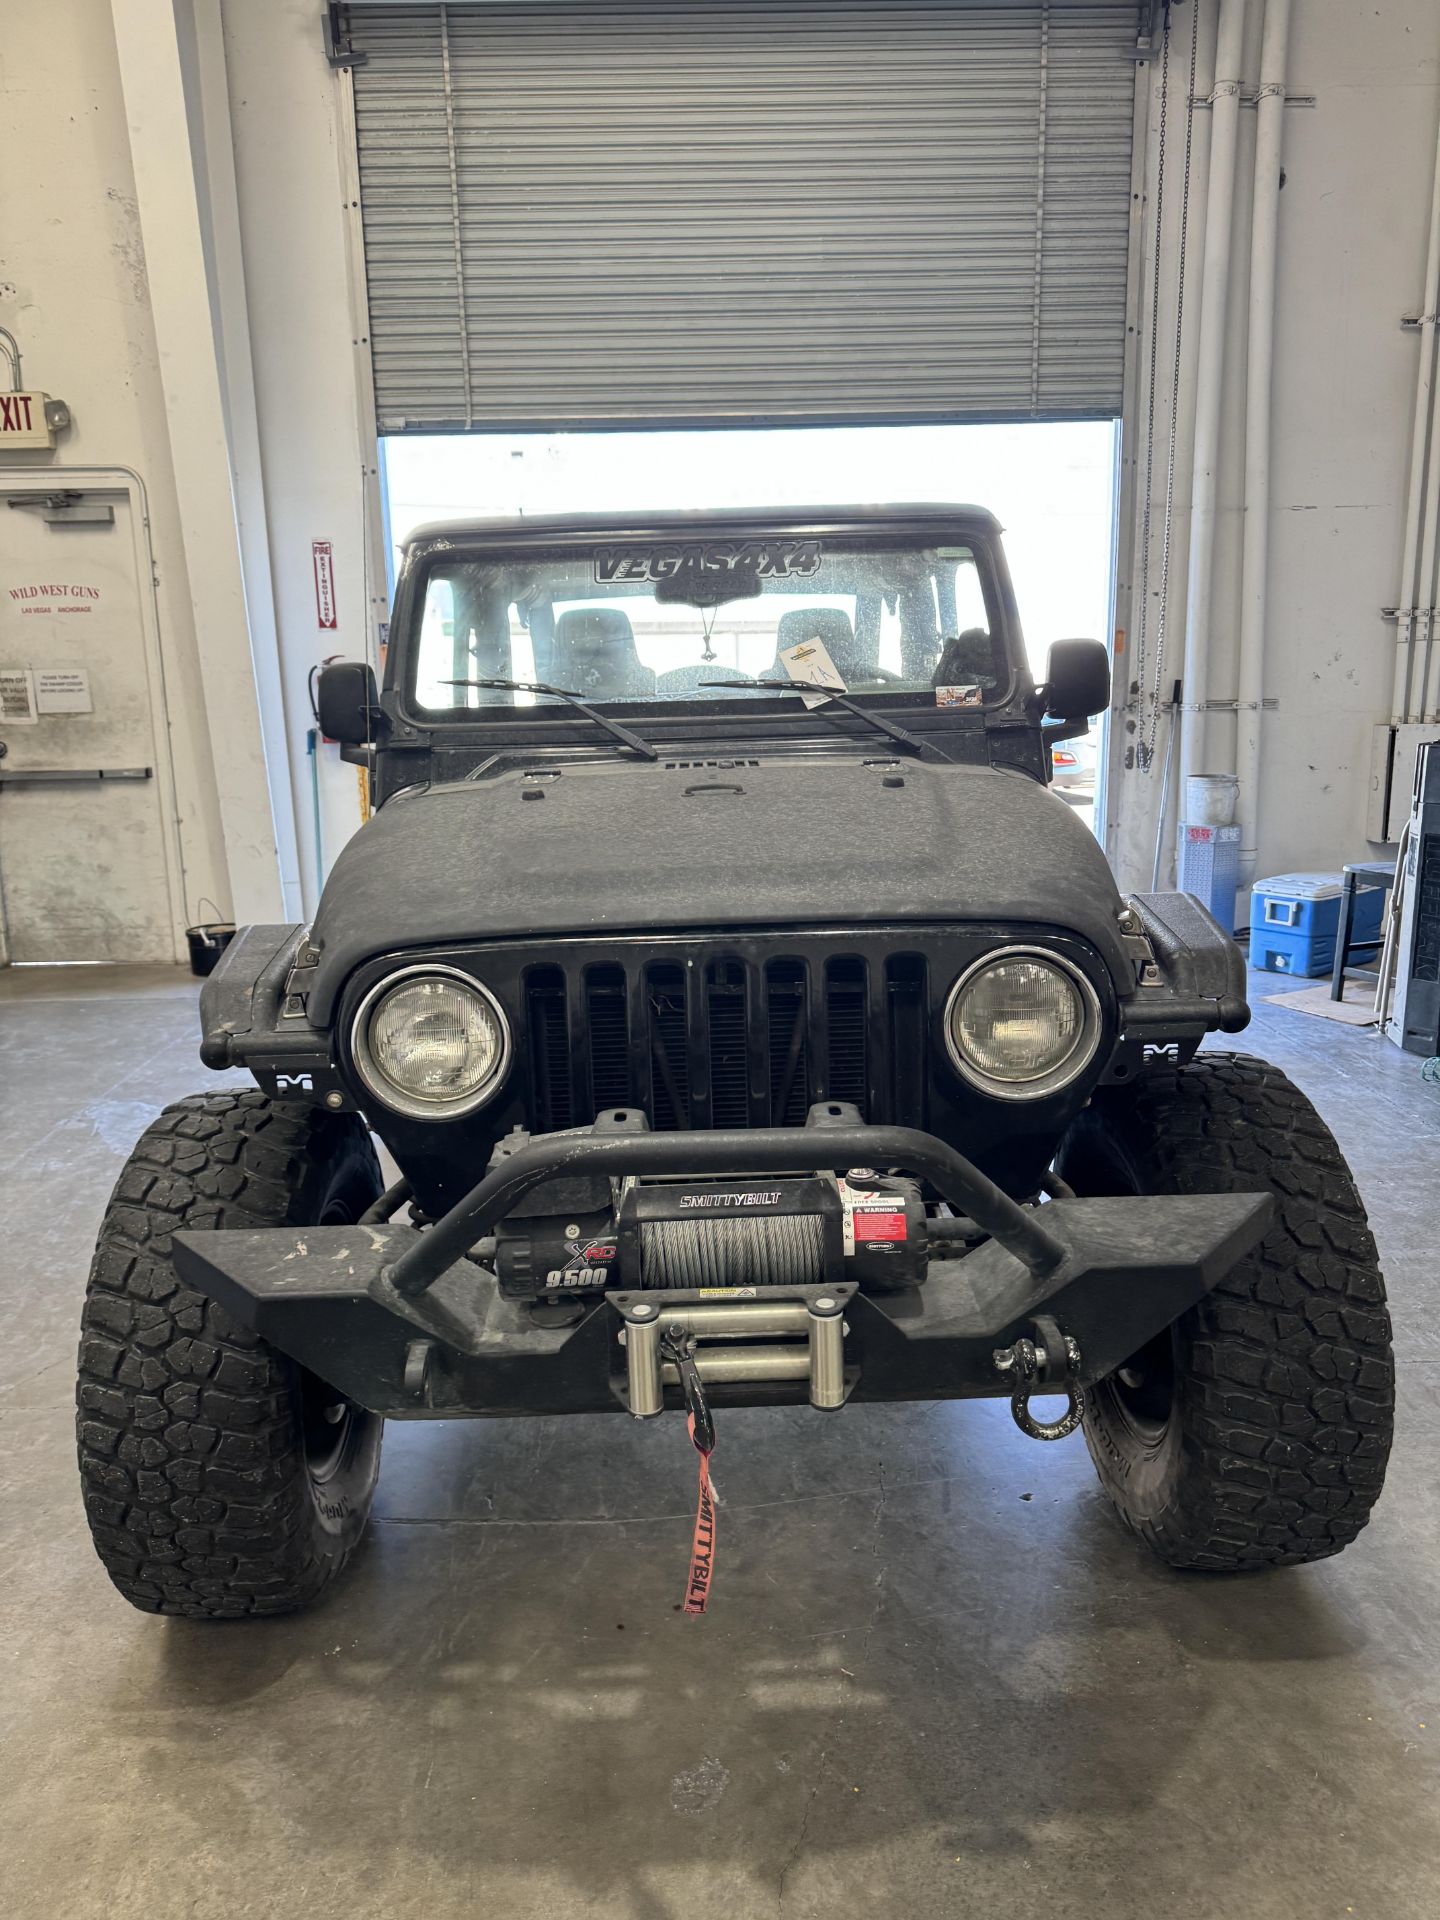 2005 JEEP LJ VERY LIMITED RUN, 2 DOOR, LIFTED , LOCKS FRONT AND REAR ++ - Image 2 of 12